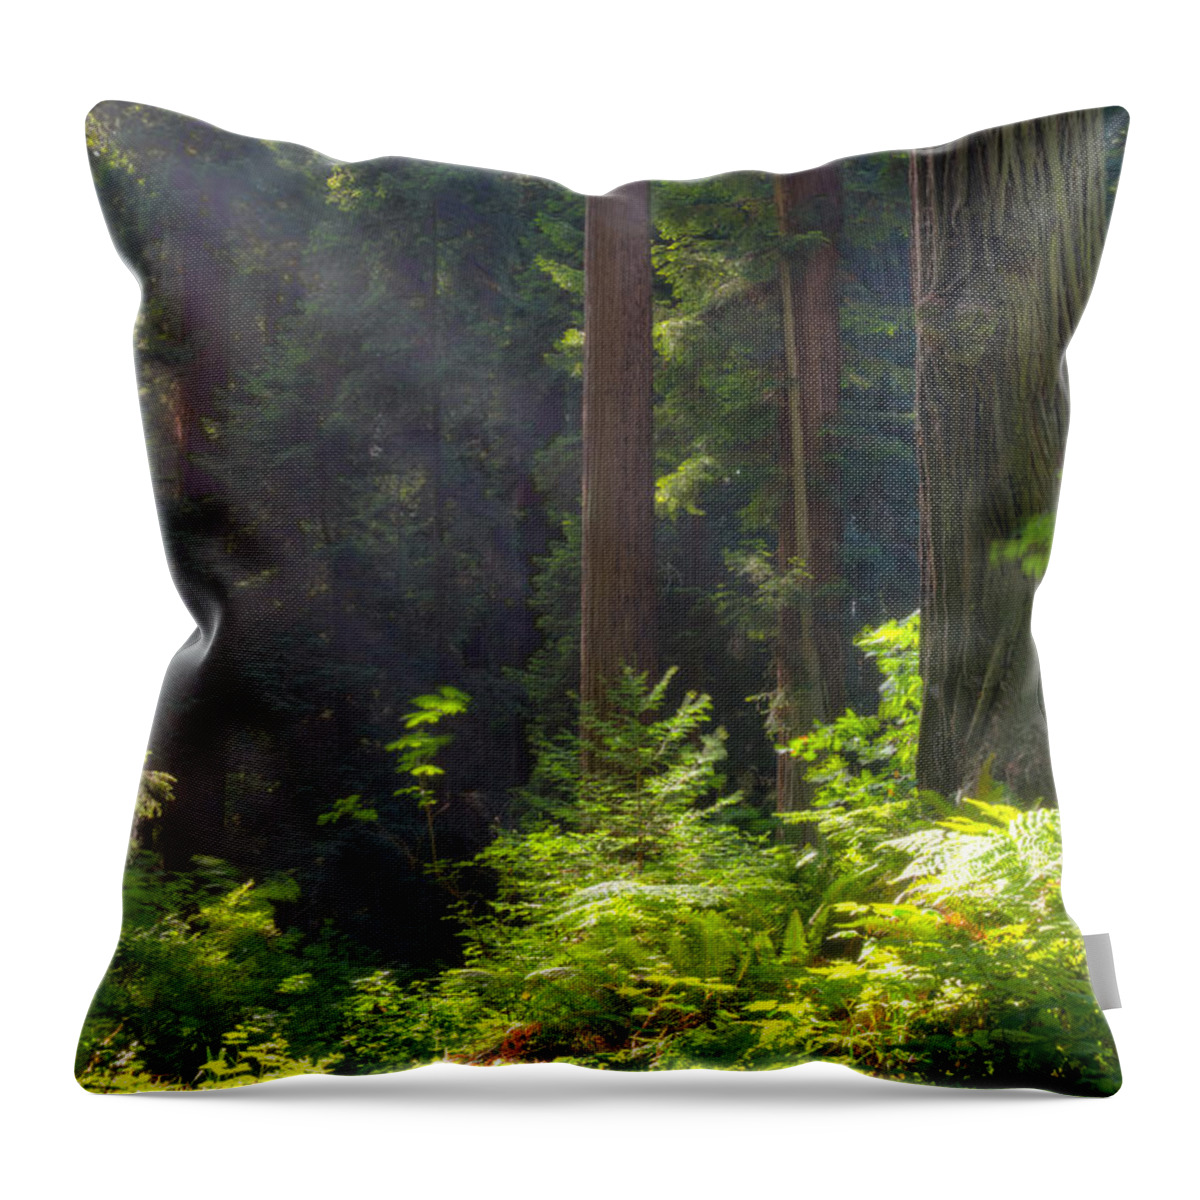 Trees Throw Pillow featuring the photograph A Place To Rest by Mark Alder